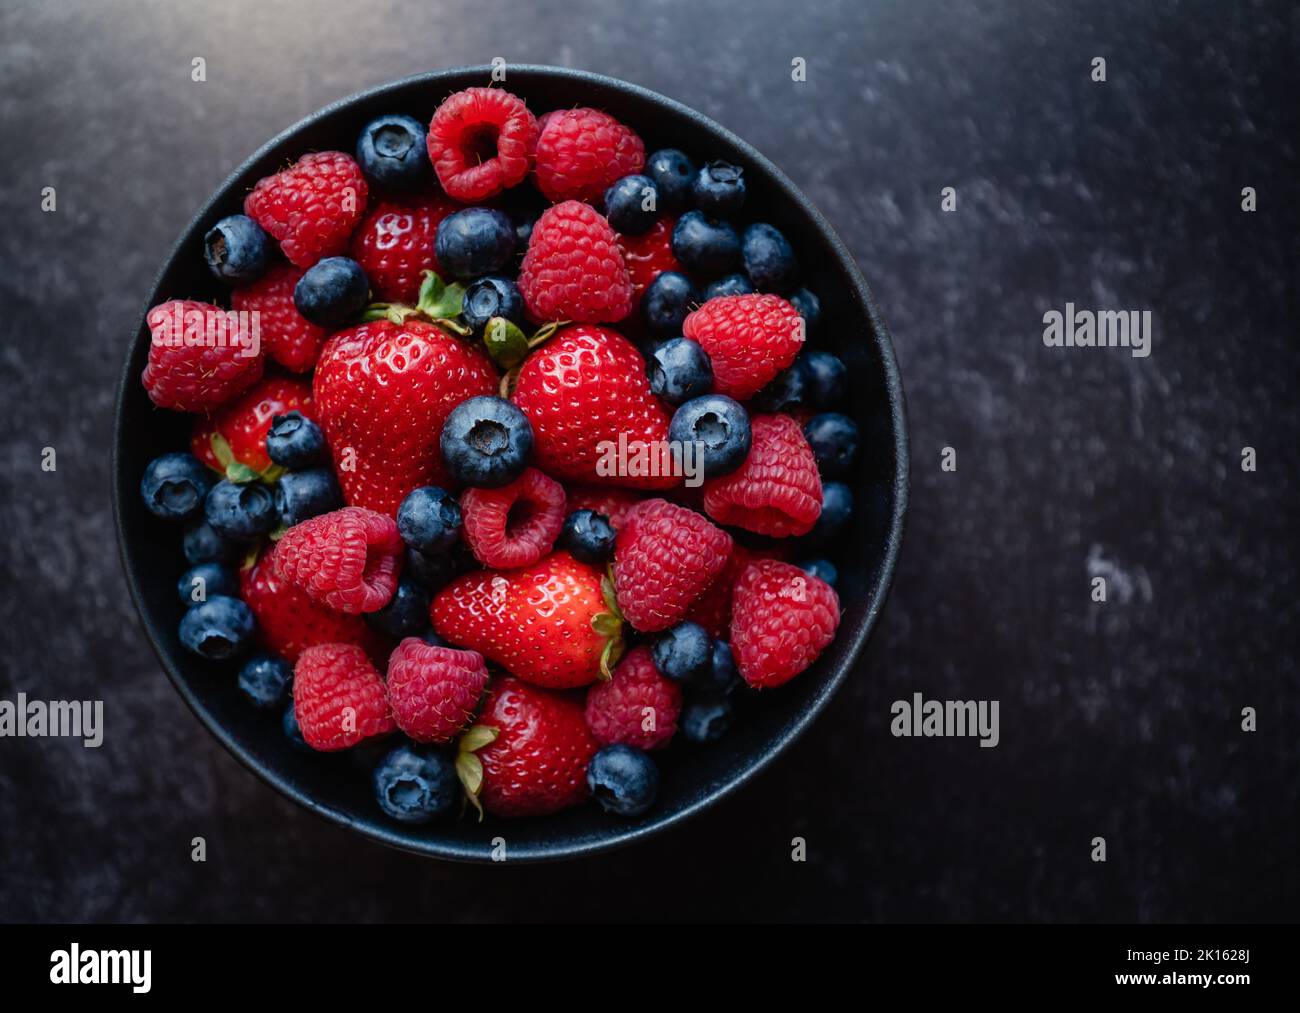 Top view of bowl of fresh mixed berries on black background. Stock Photo